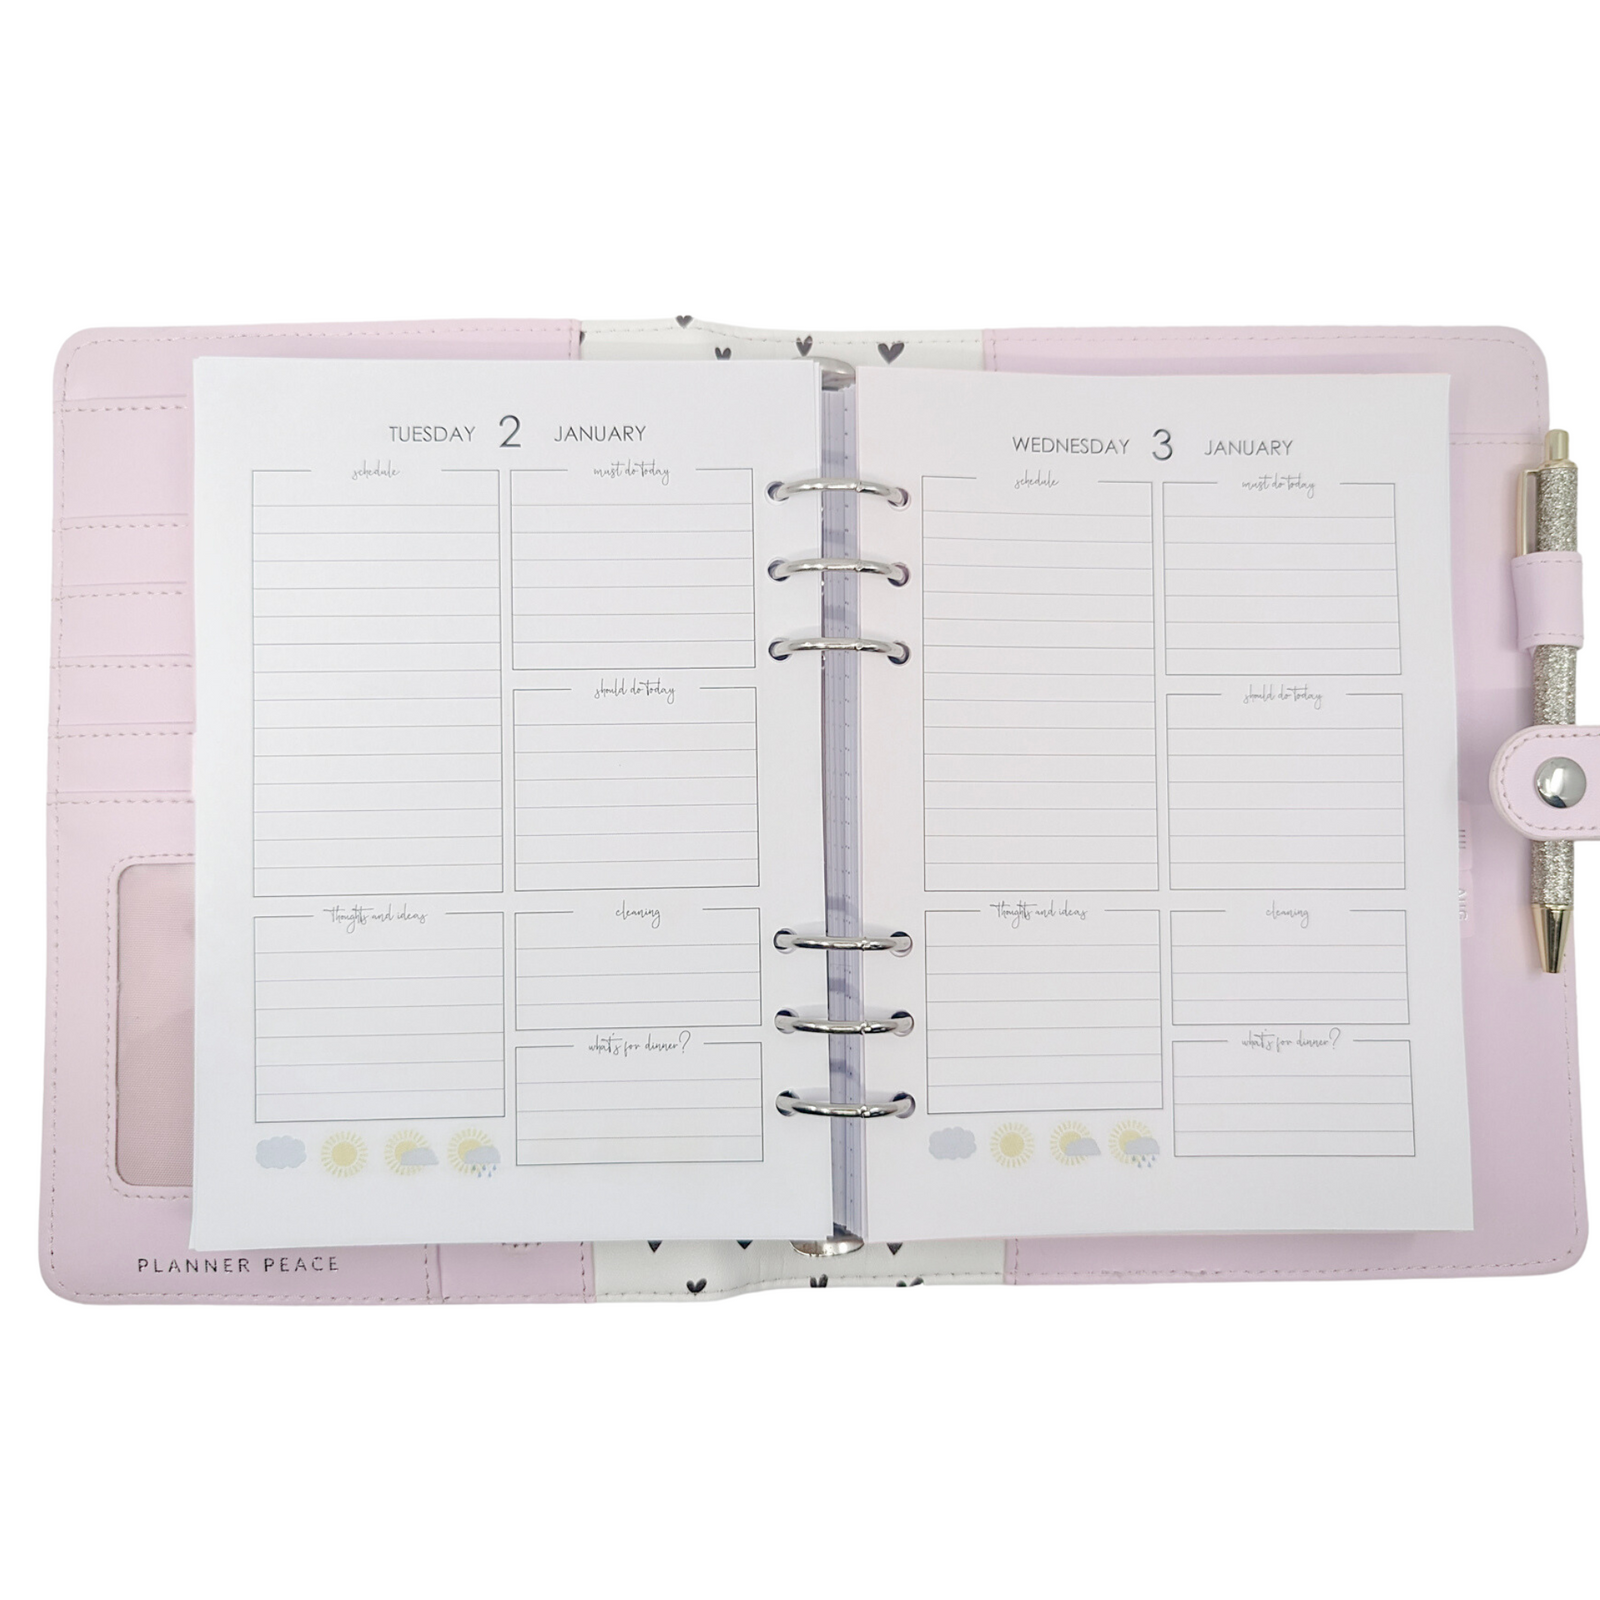 Daily planner refill for A5 planners including Planner Peace Kikki.K and Filofax